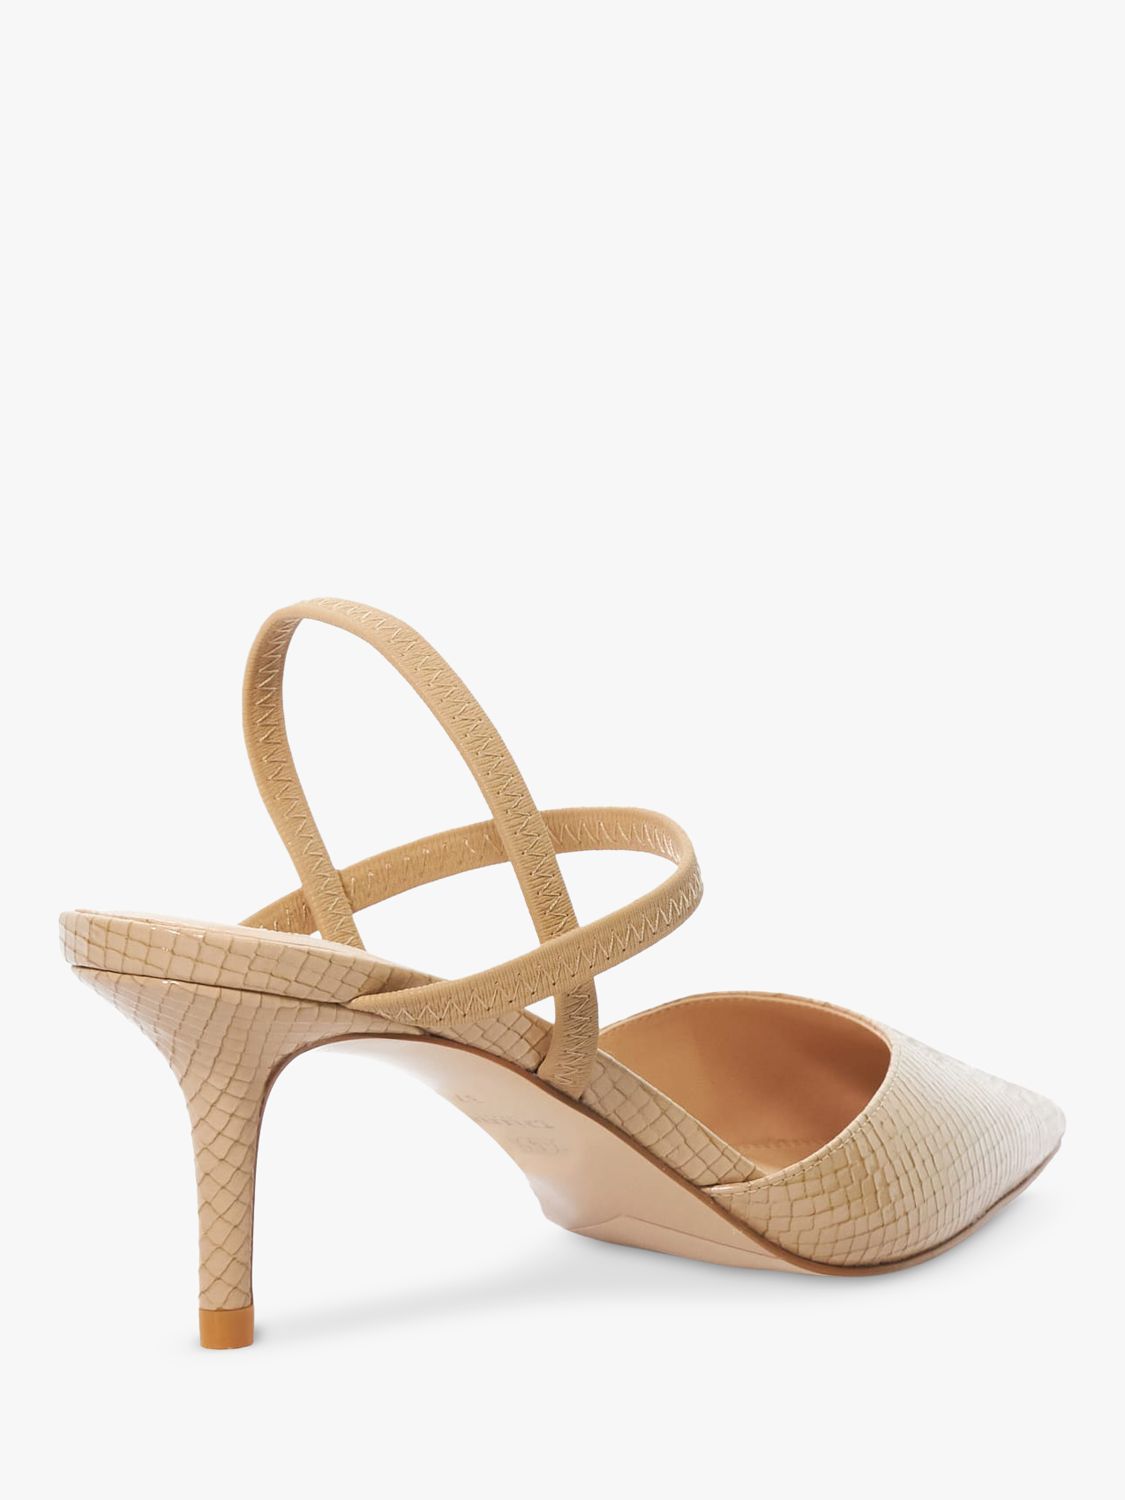 Buy Dune Classical Slingback Mid Heel Court Shoes, Blush Online at johnlewis.com